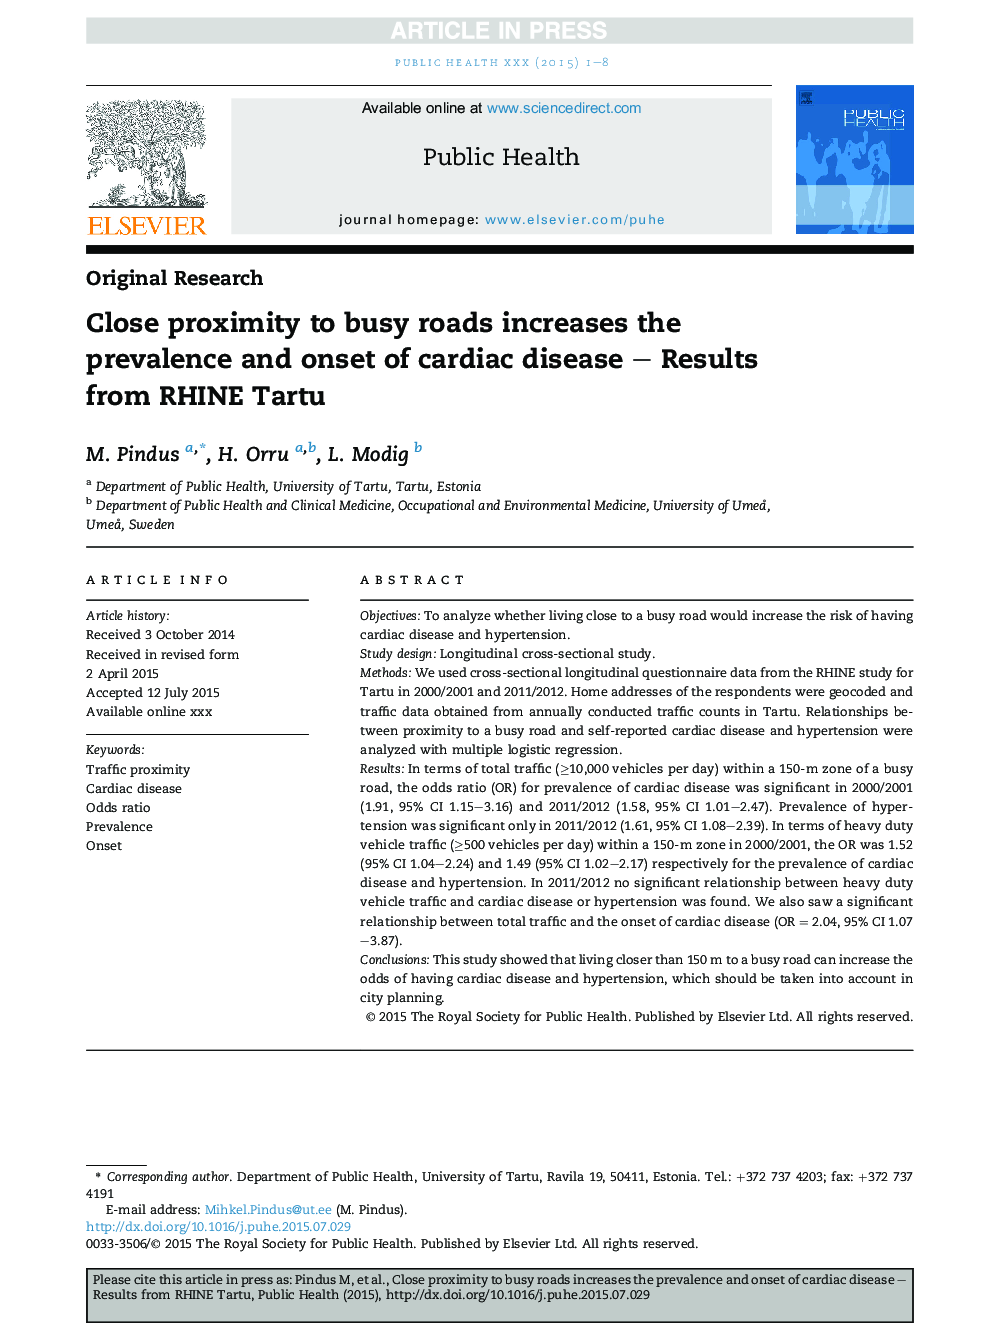 Close proximity to busy roads increases the prevalence and onset of cardiac disease - Results from RHINE Tartu